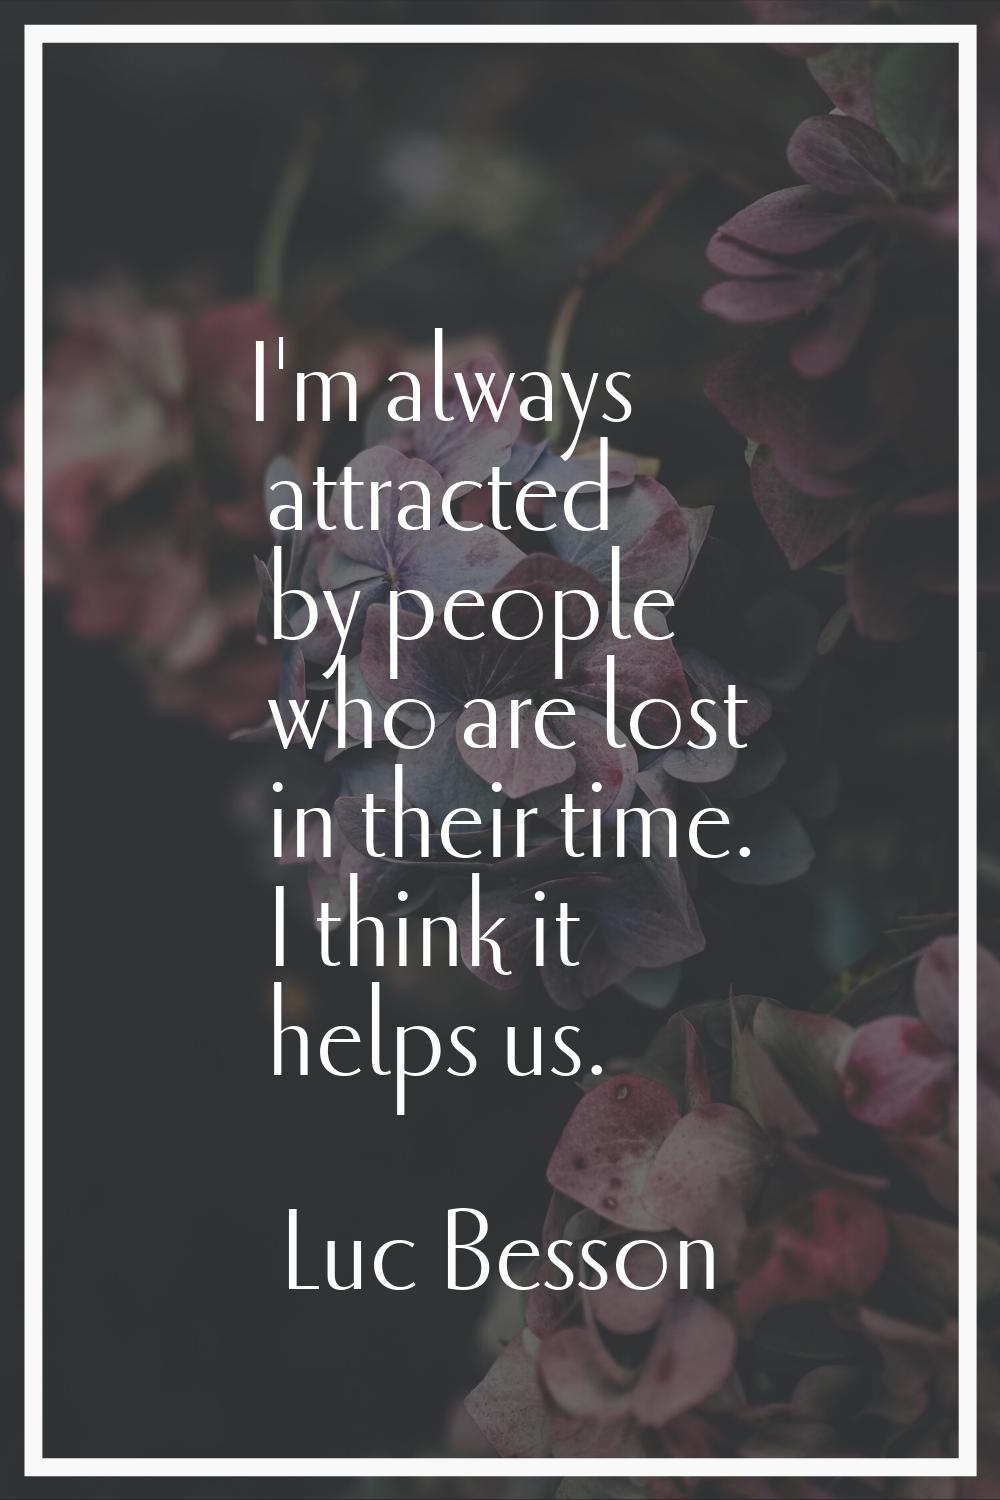 I'm always attracted by people who are lost in their time. I think it helps us.